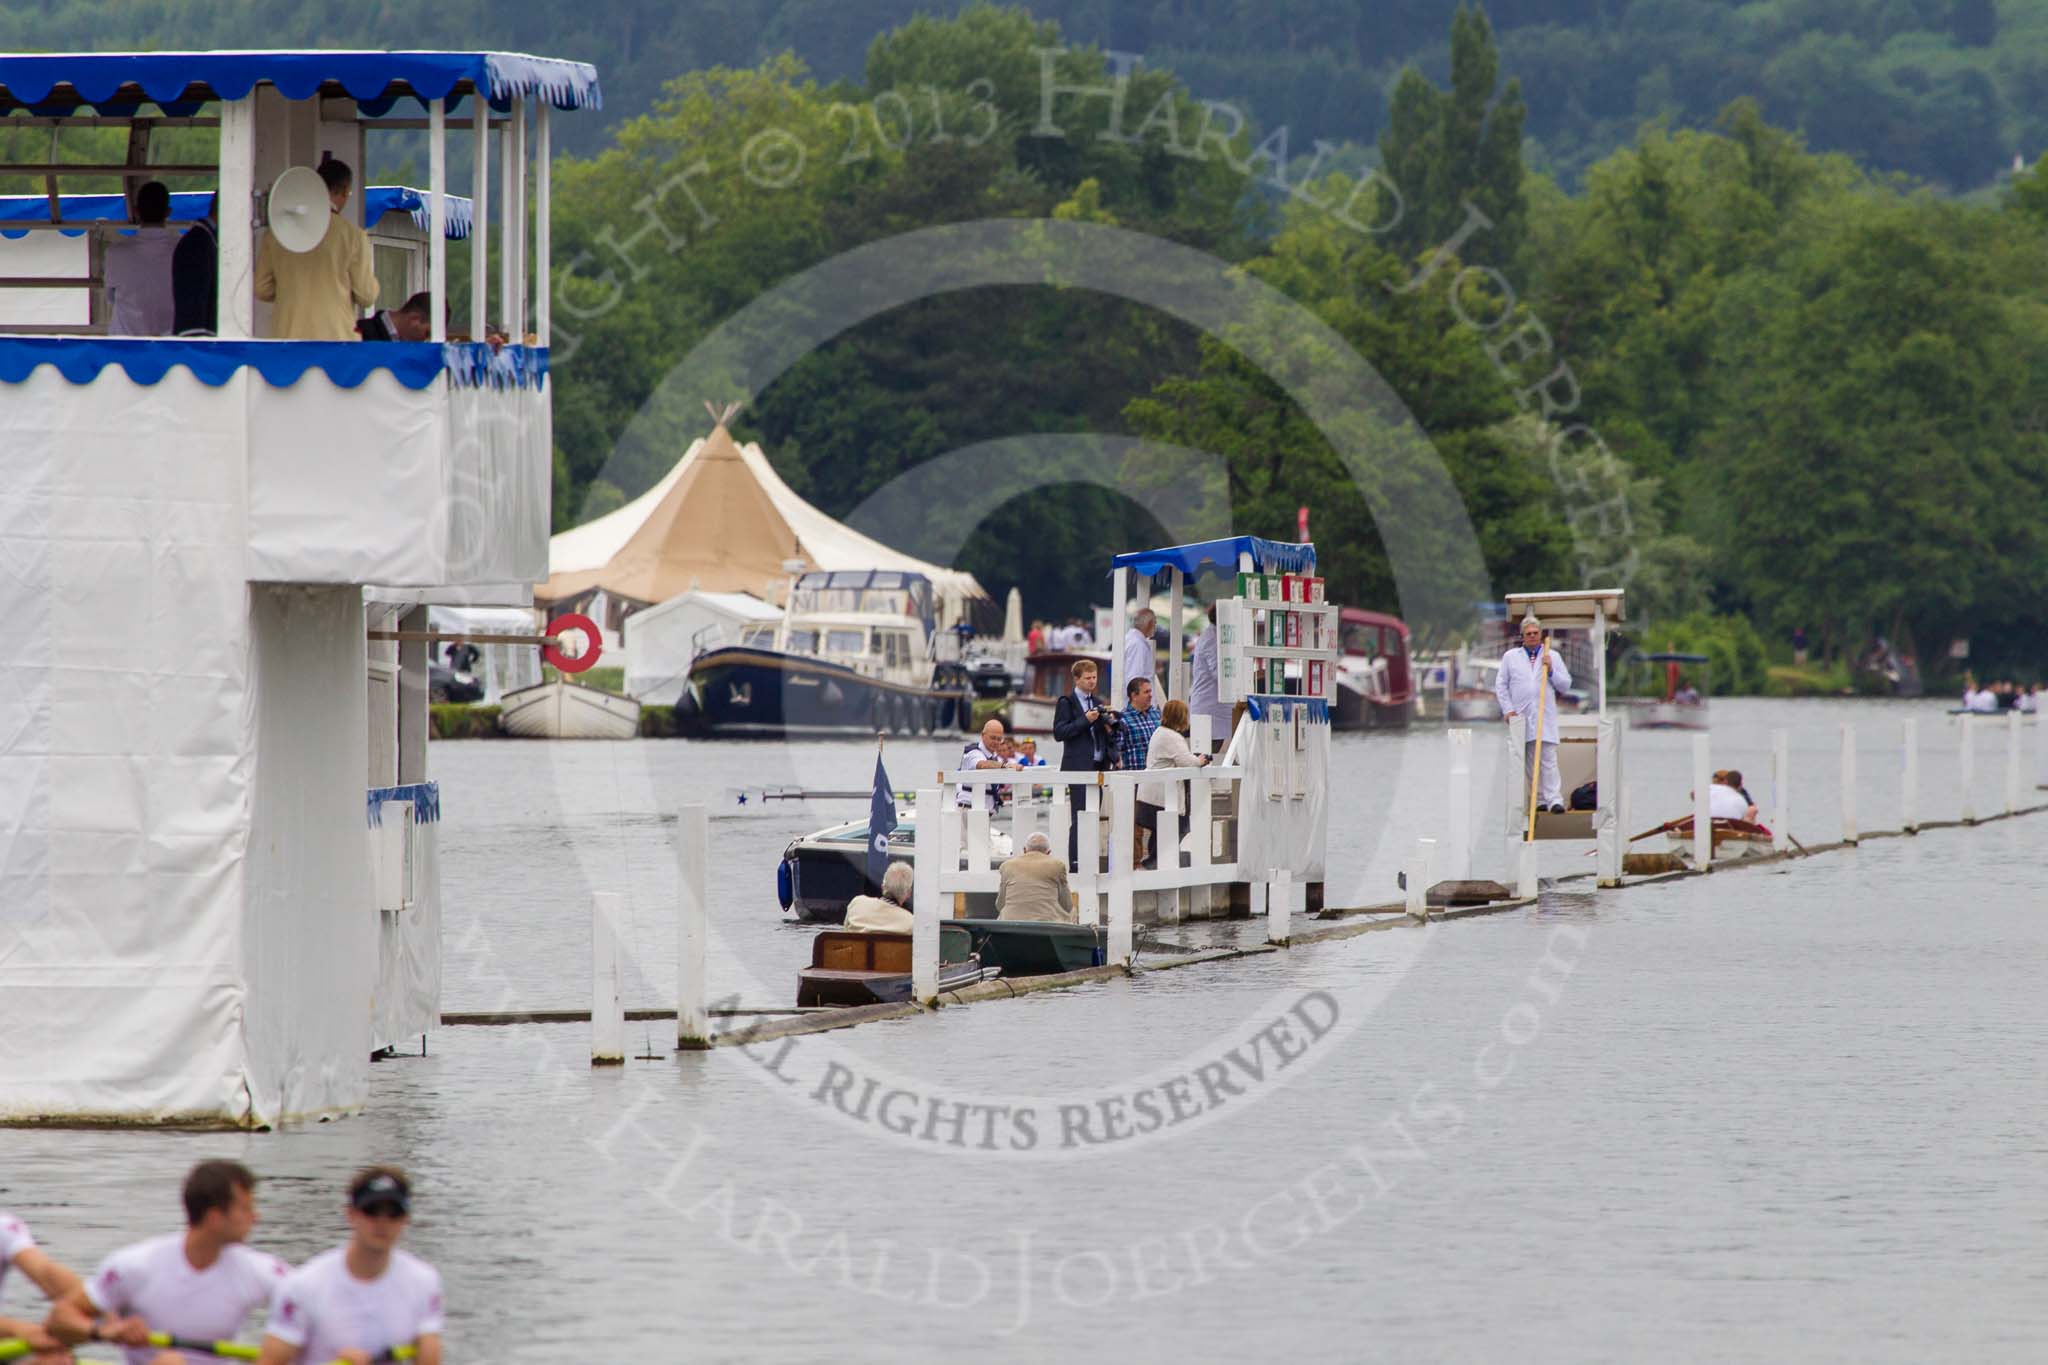 Henley Royal Regatta 2013 (Wednesday): In the middle of the river close to the finish line of the Henley Royal Regatta - on the left the Judges' Box, then the photo box next to the progress board..
River Thames between Henley and Temple Island,
Henley-on-Thames,
Berkshire,
United Kingdom,
on 03 July 2013 at 09:35, image #11